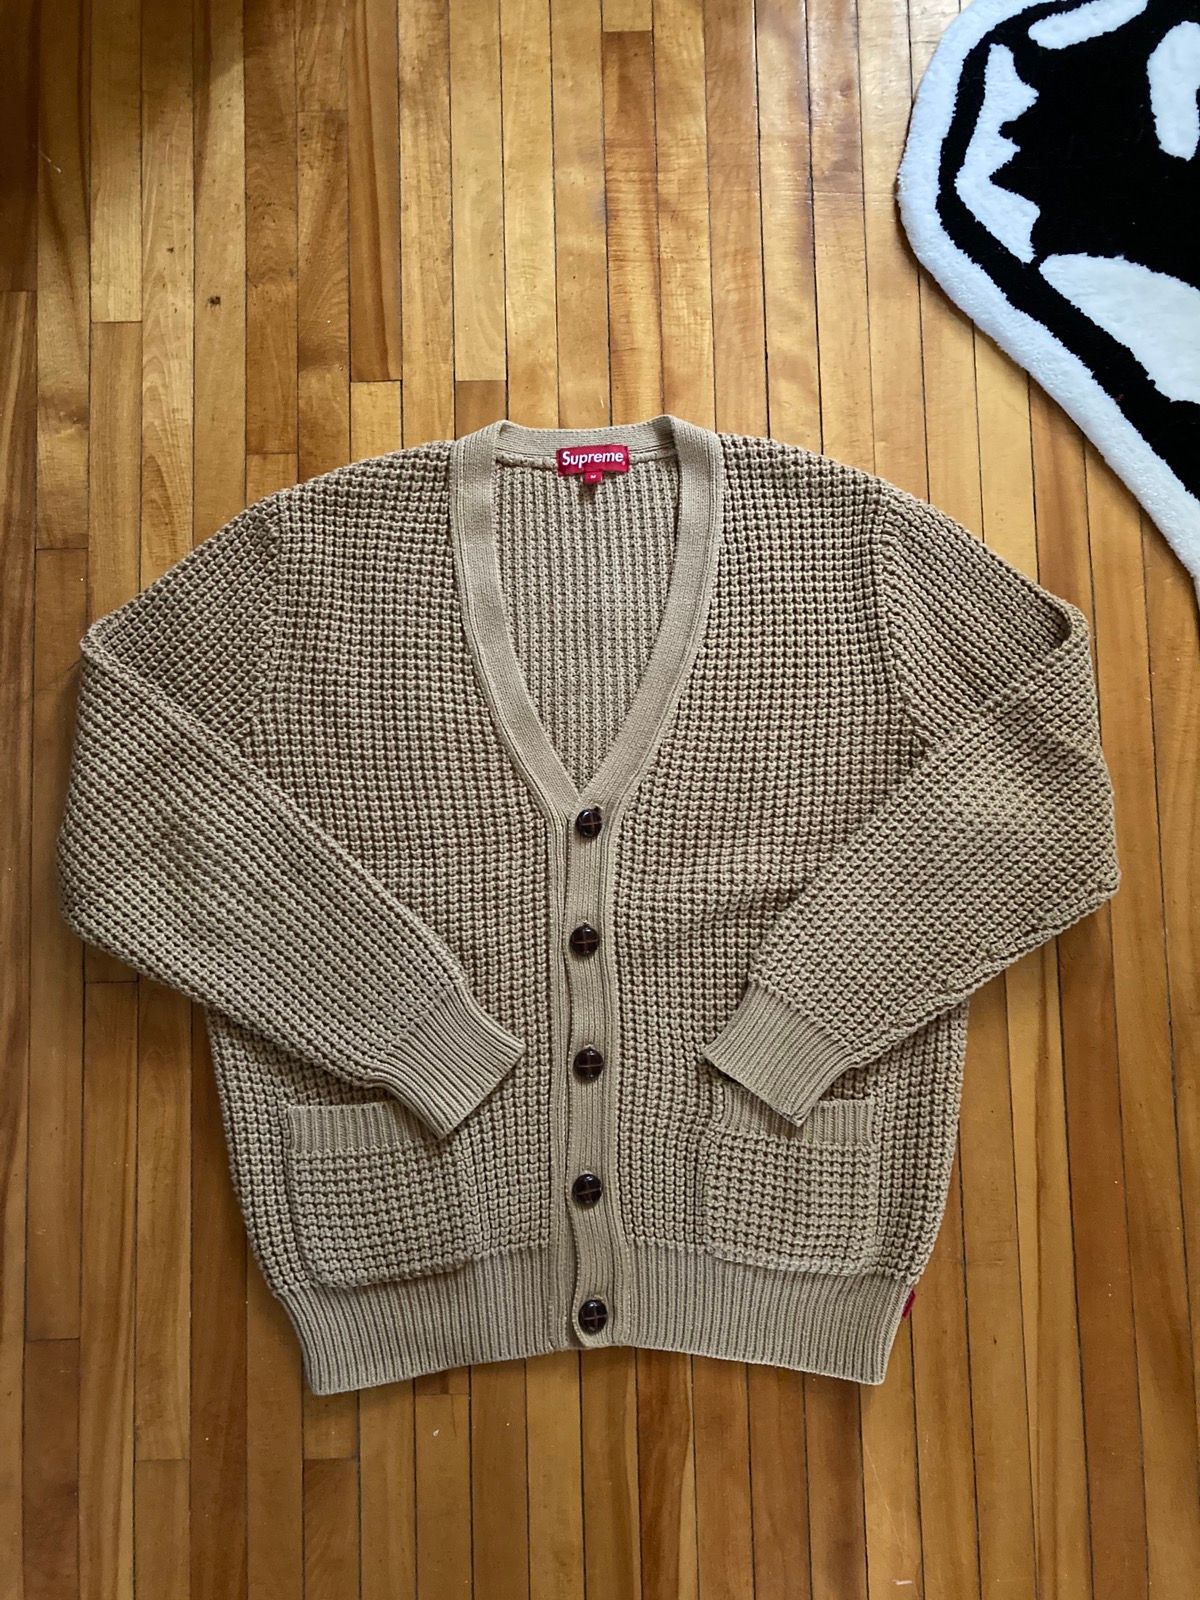 Supreme SS15 waffle knit cardigan | Grailed